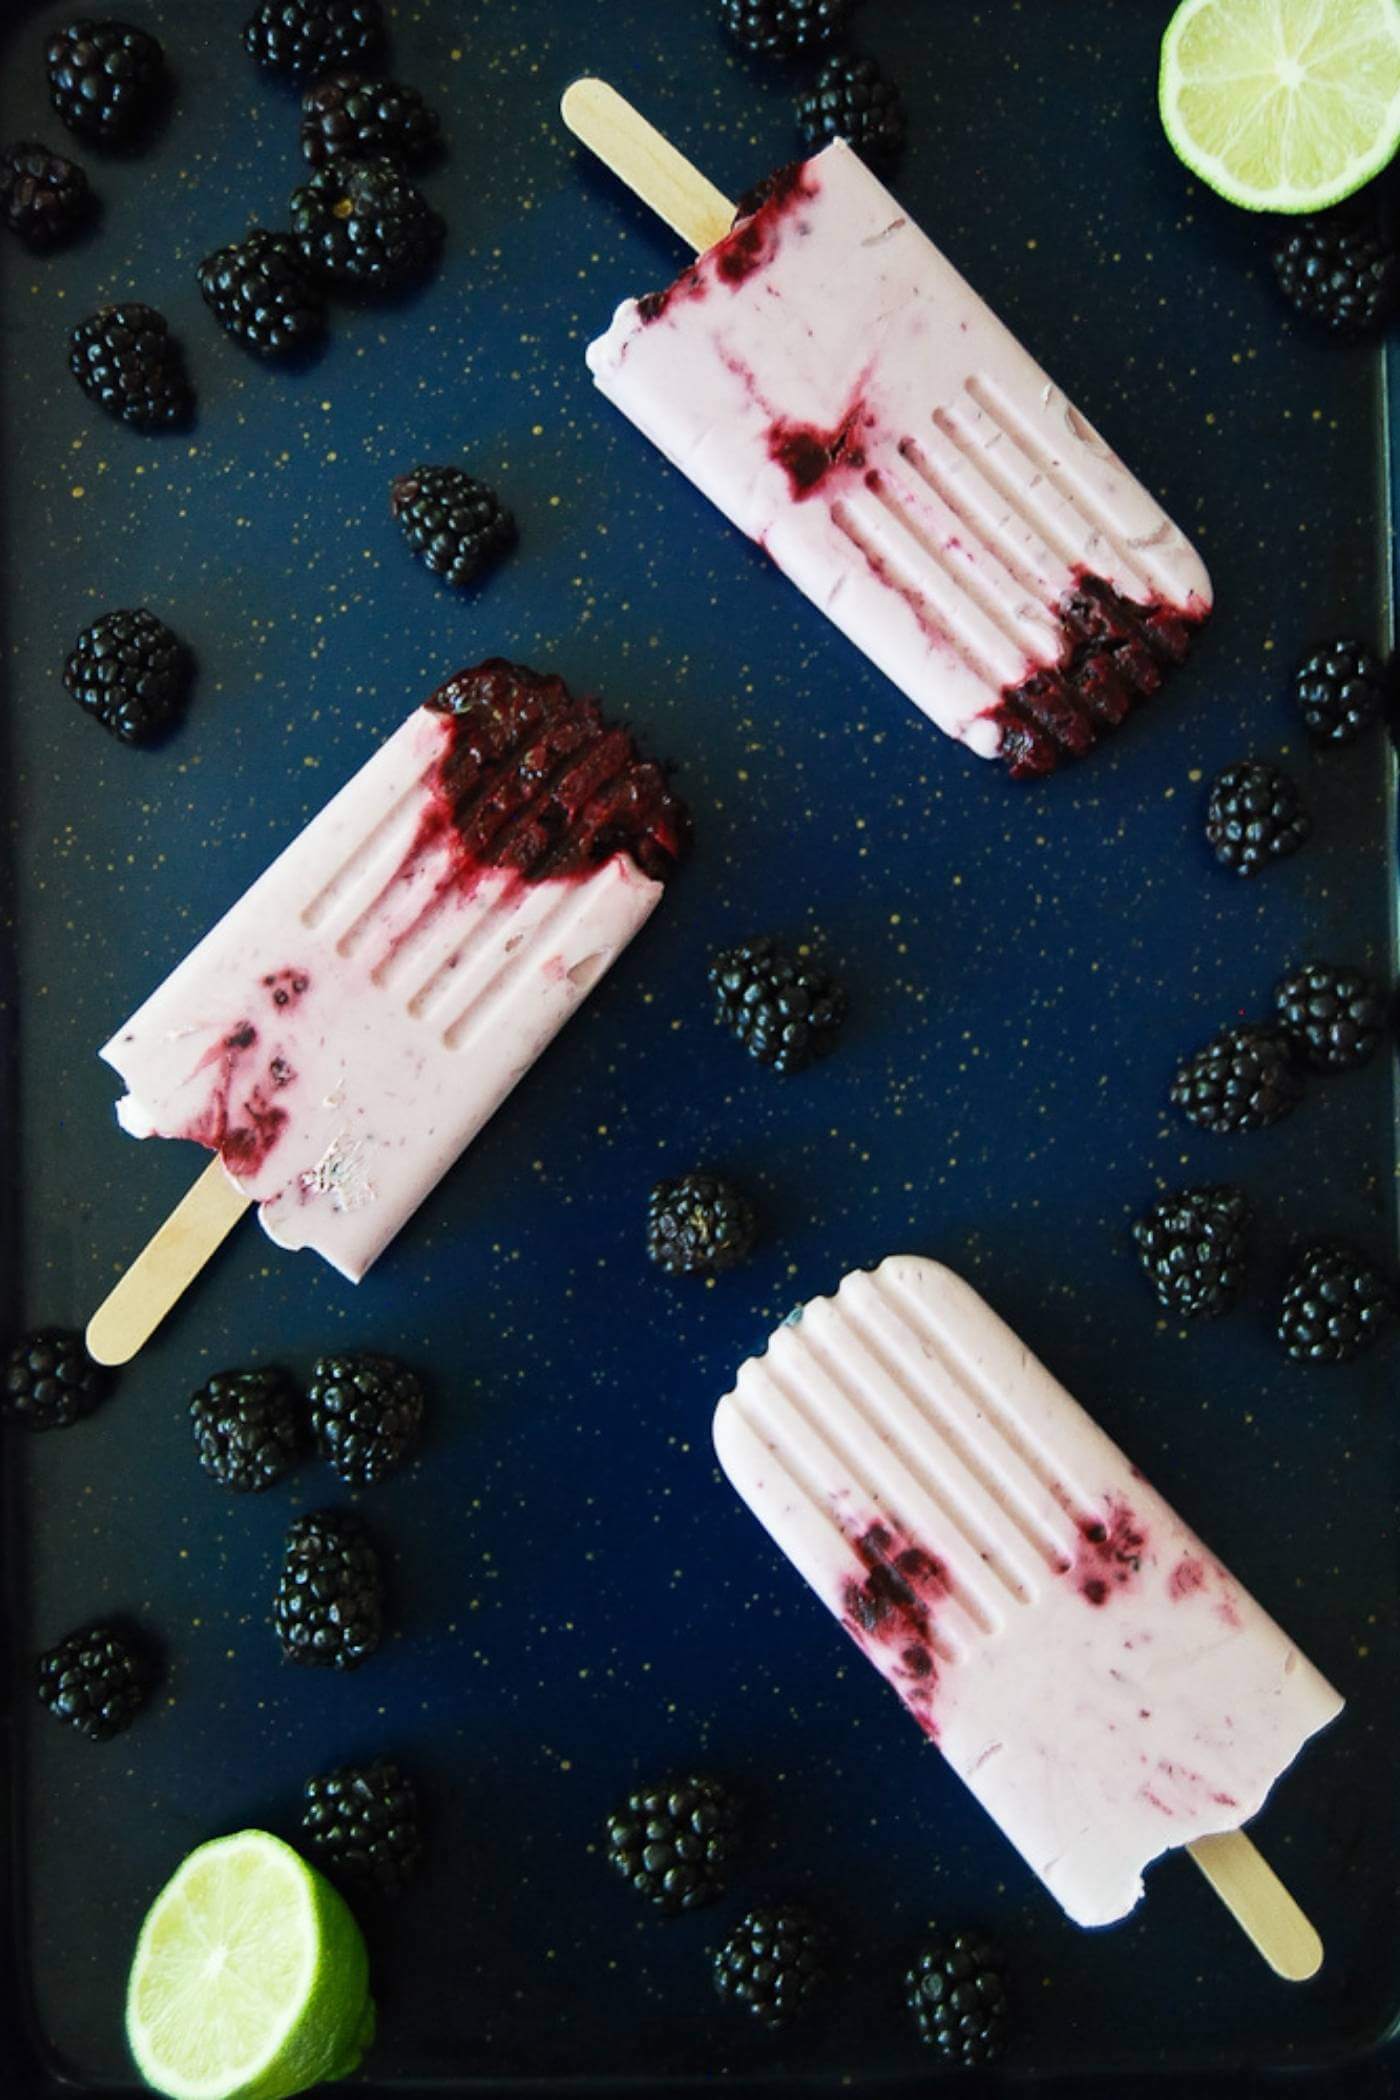 Blackberry Creamsicle on tray with blueberries.